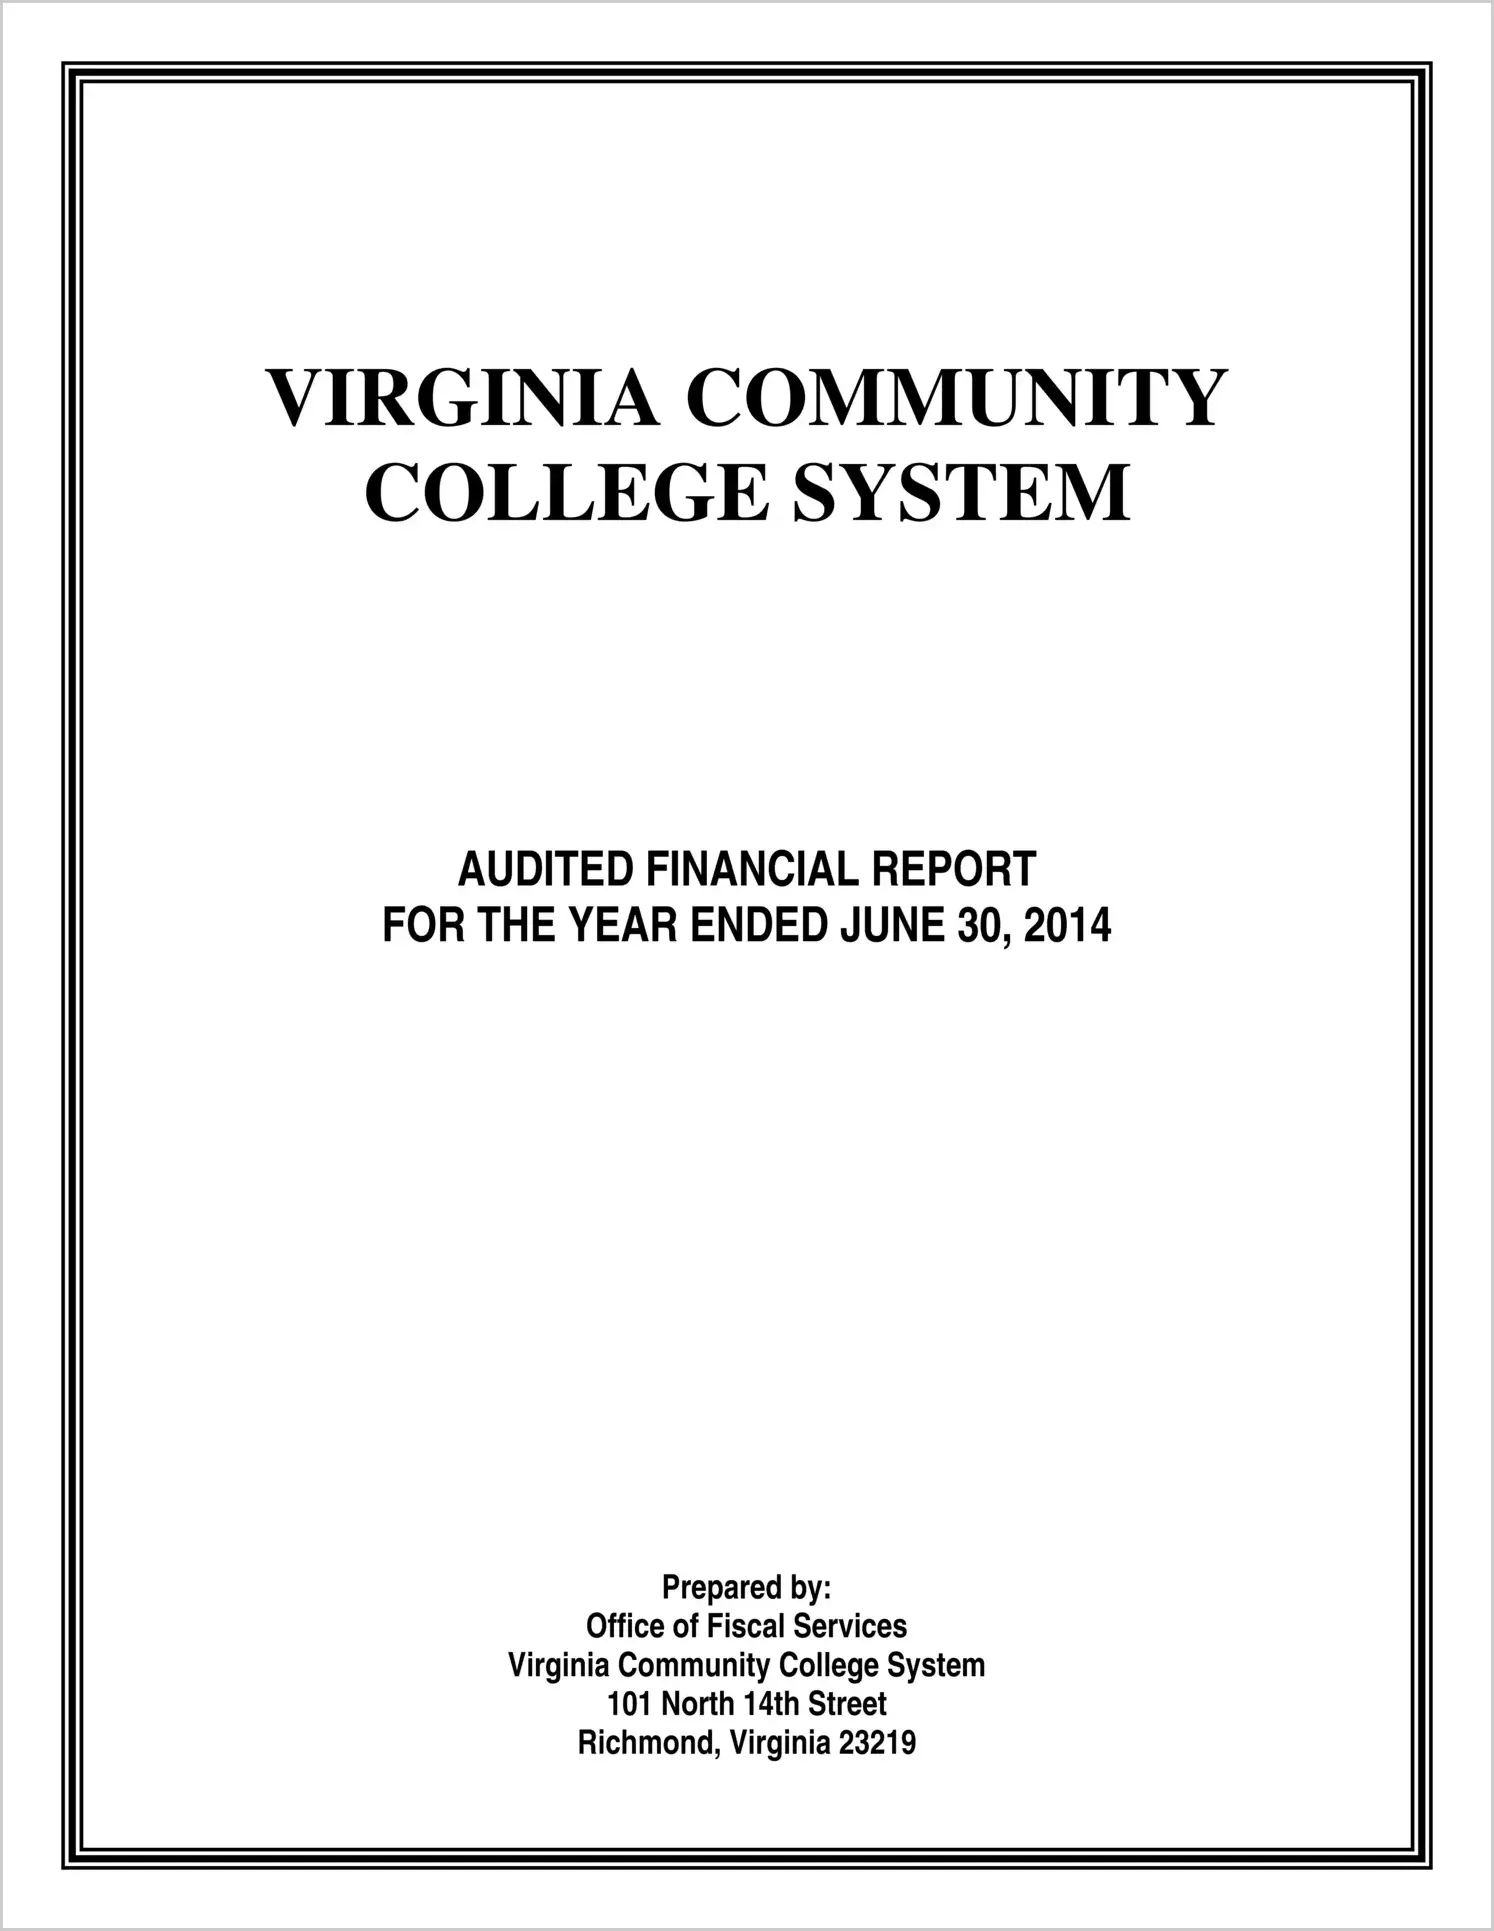 Virginia Community College System Financial Statement for the year ended June 30, 2014